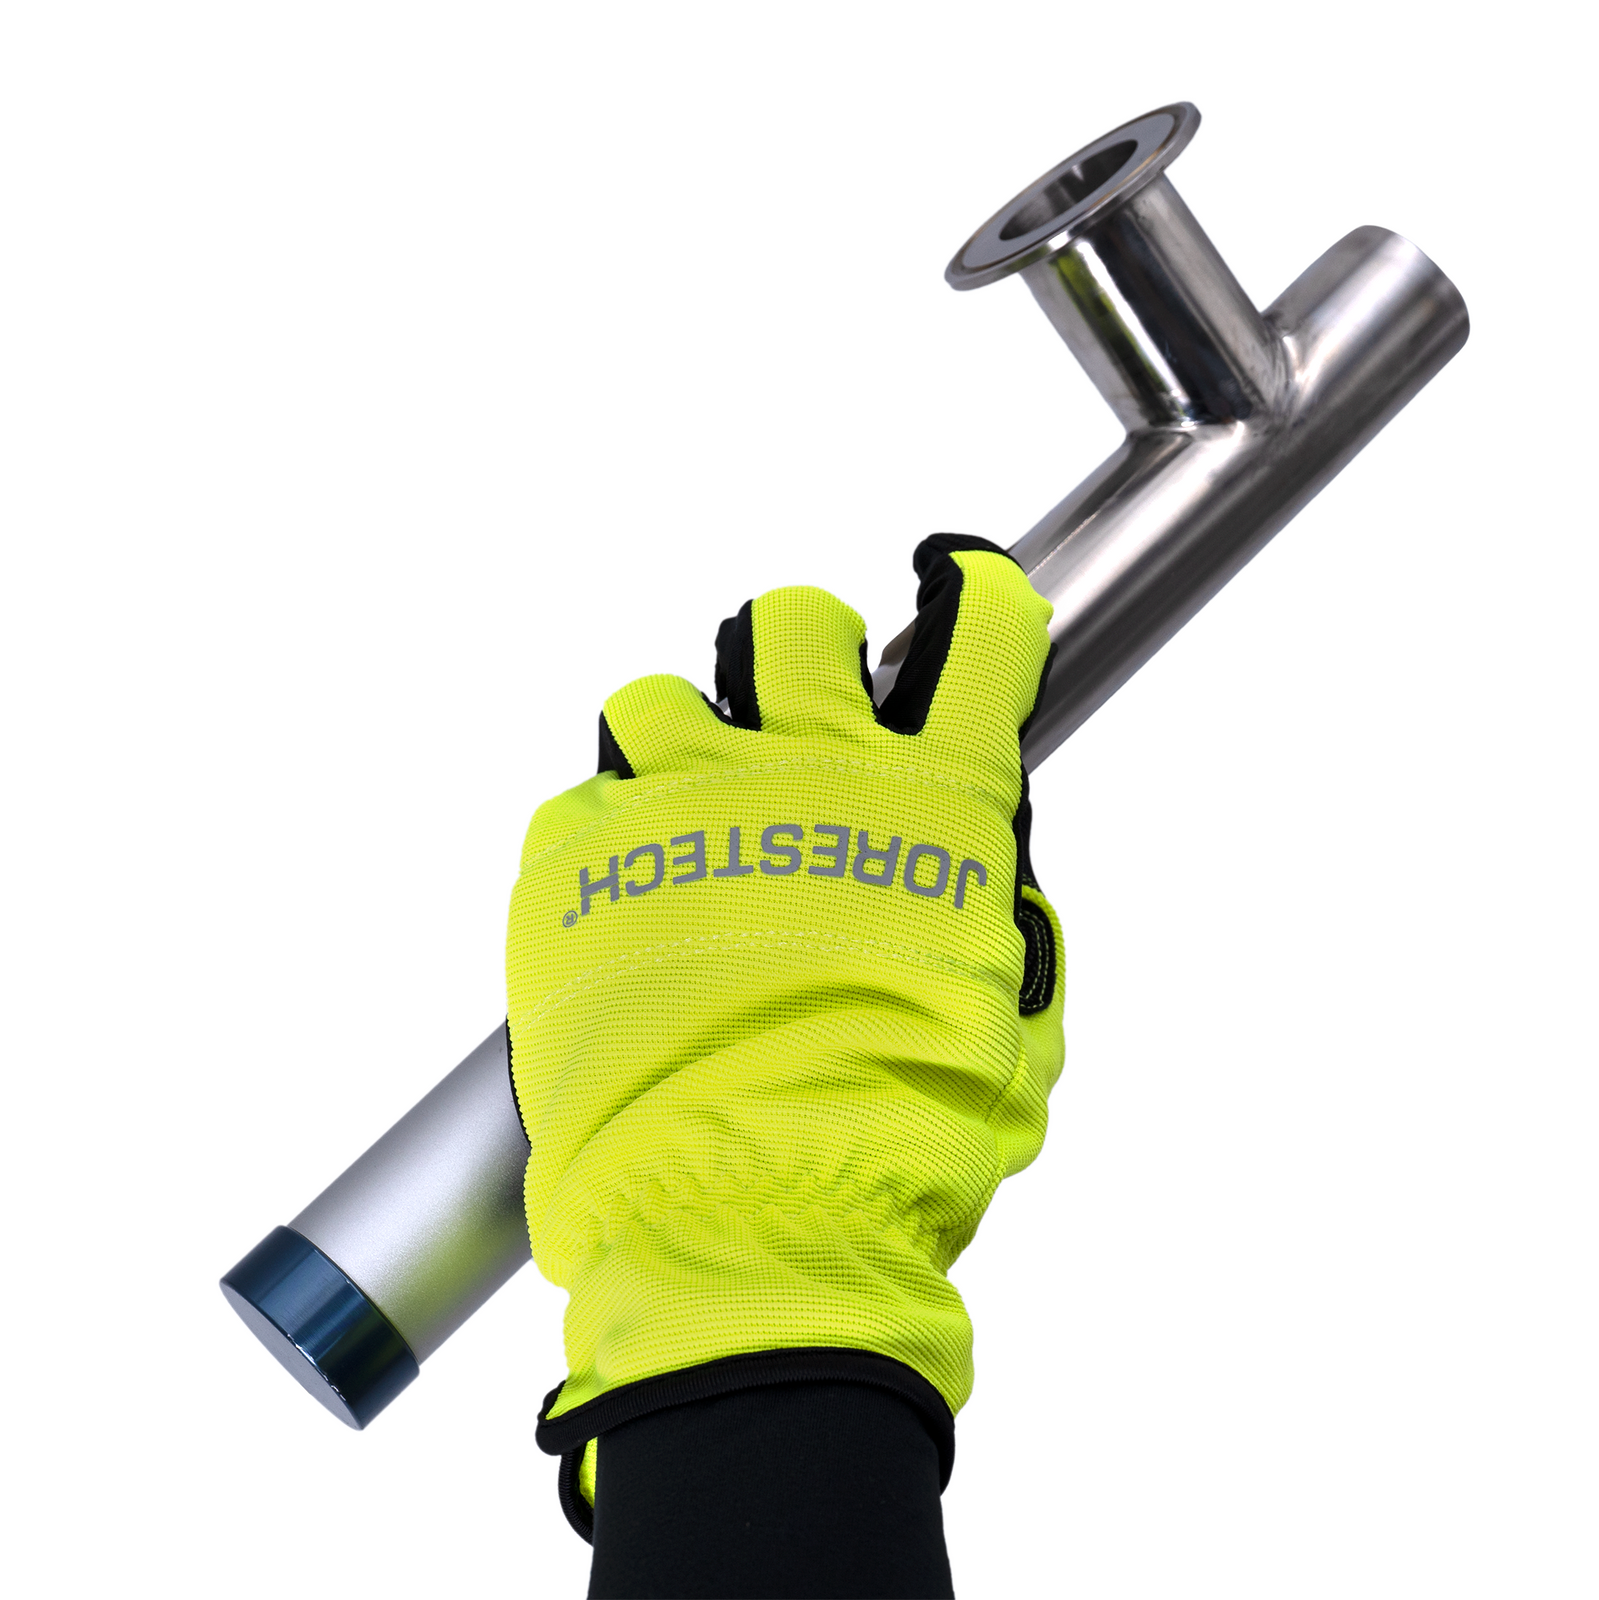 Close up showing the hand of a person wearing the hi vis safety glove with fleece lining holding a cold metal tube